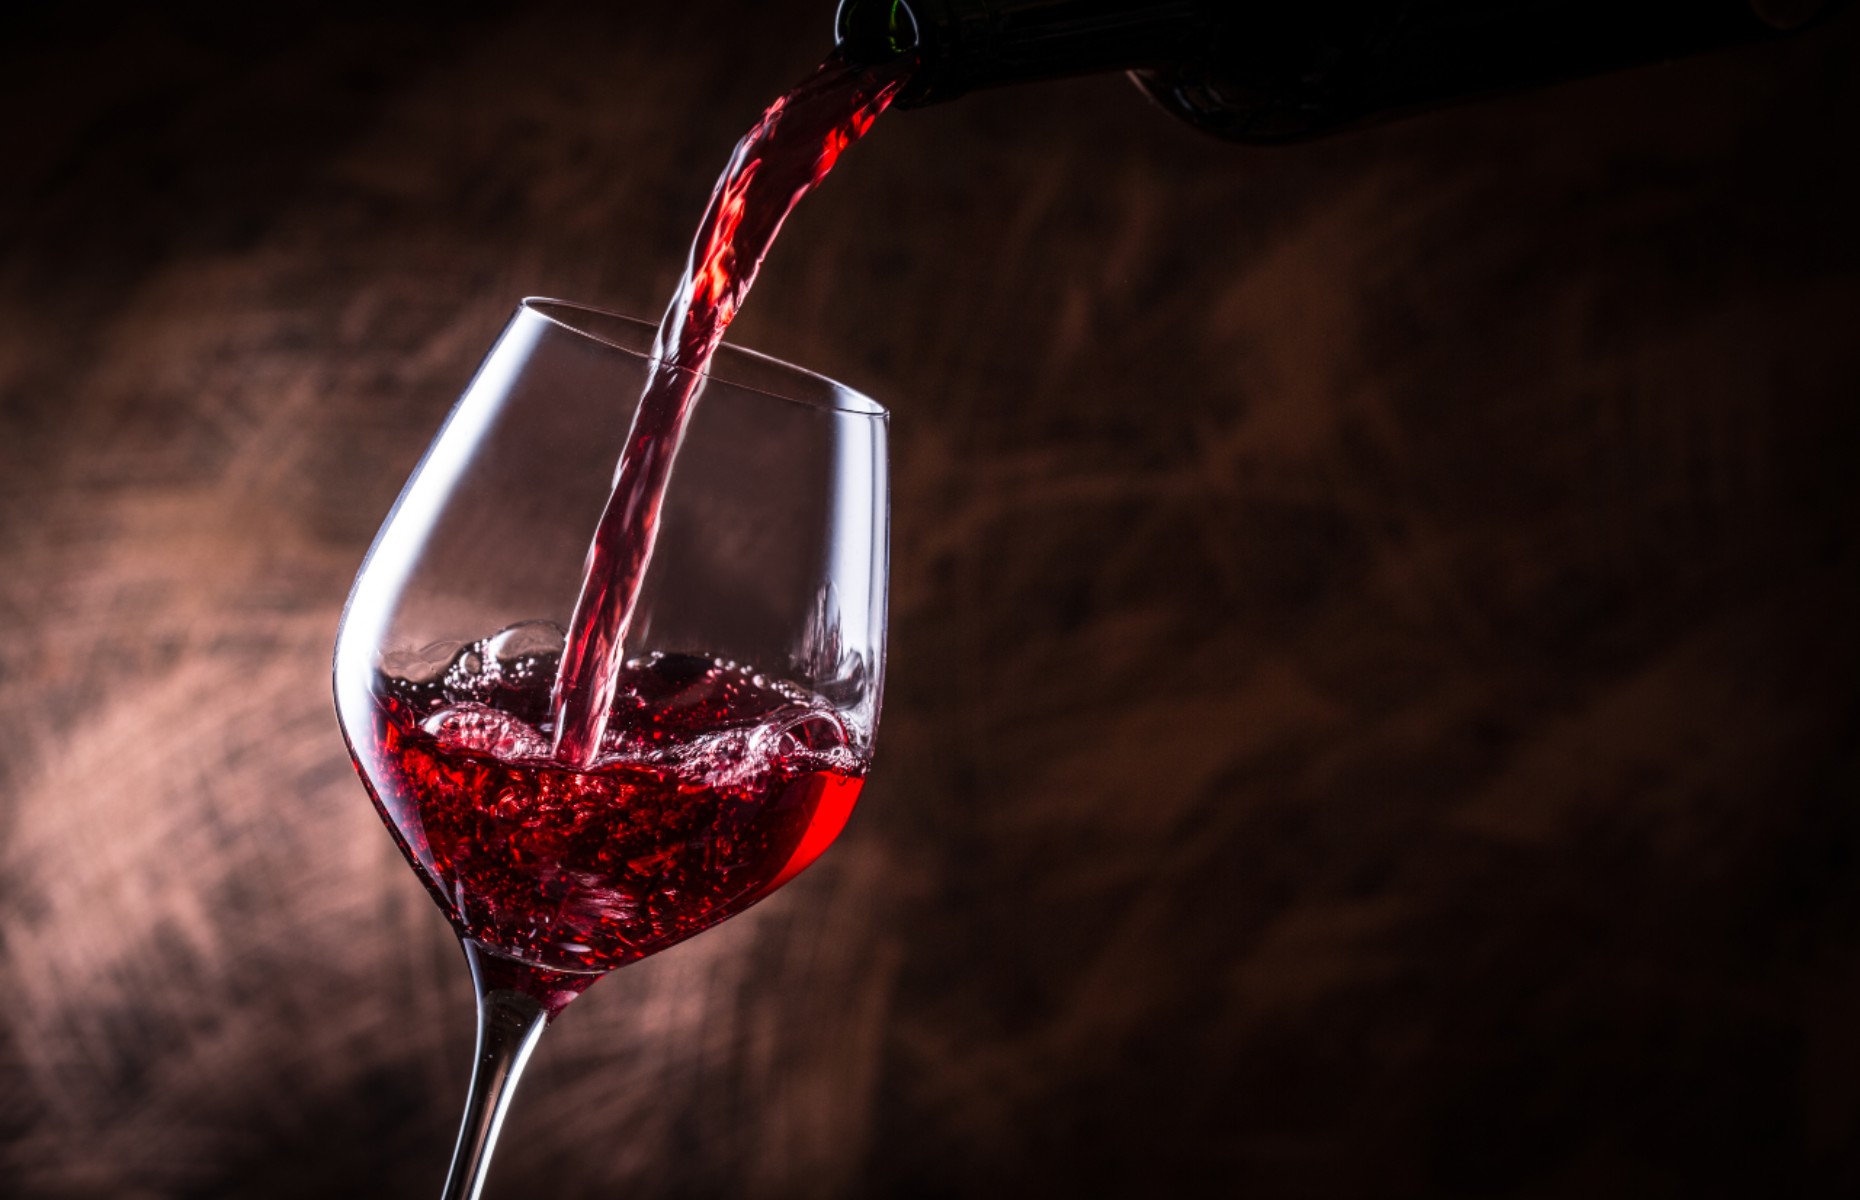 A wine glass for tasting with a wide bowl (Image: Jazz331/Shutterstock )